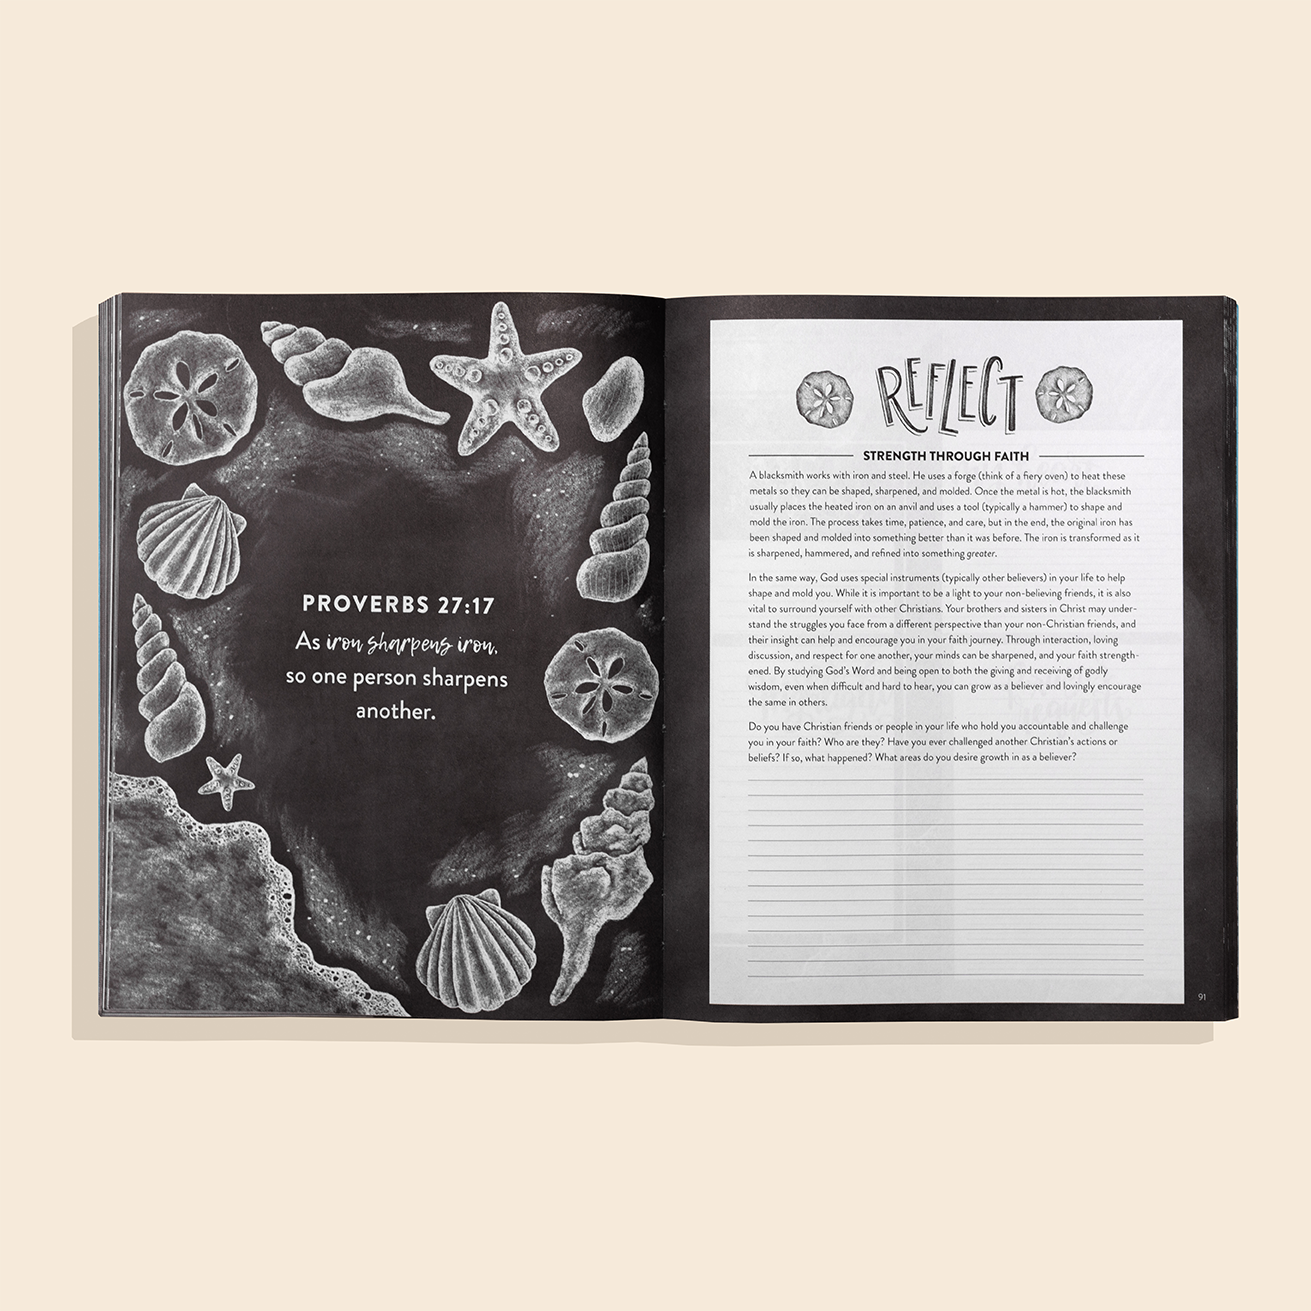 The Prayer Journal for Teen Girls features a chalkboard design and is adorned with seashells.